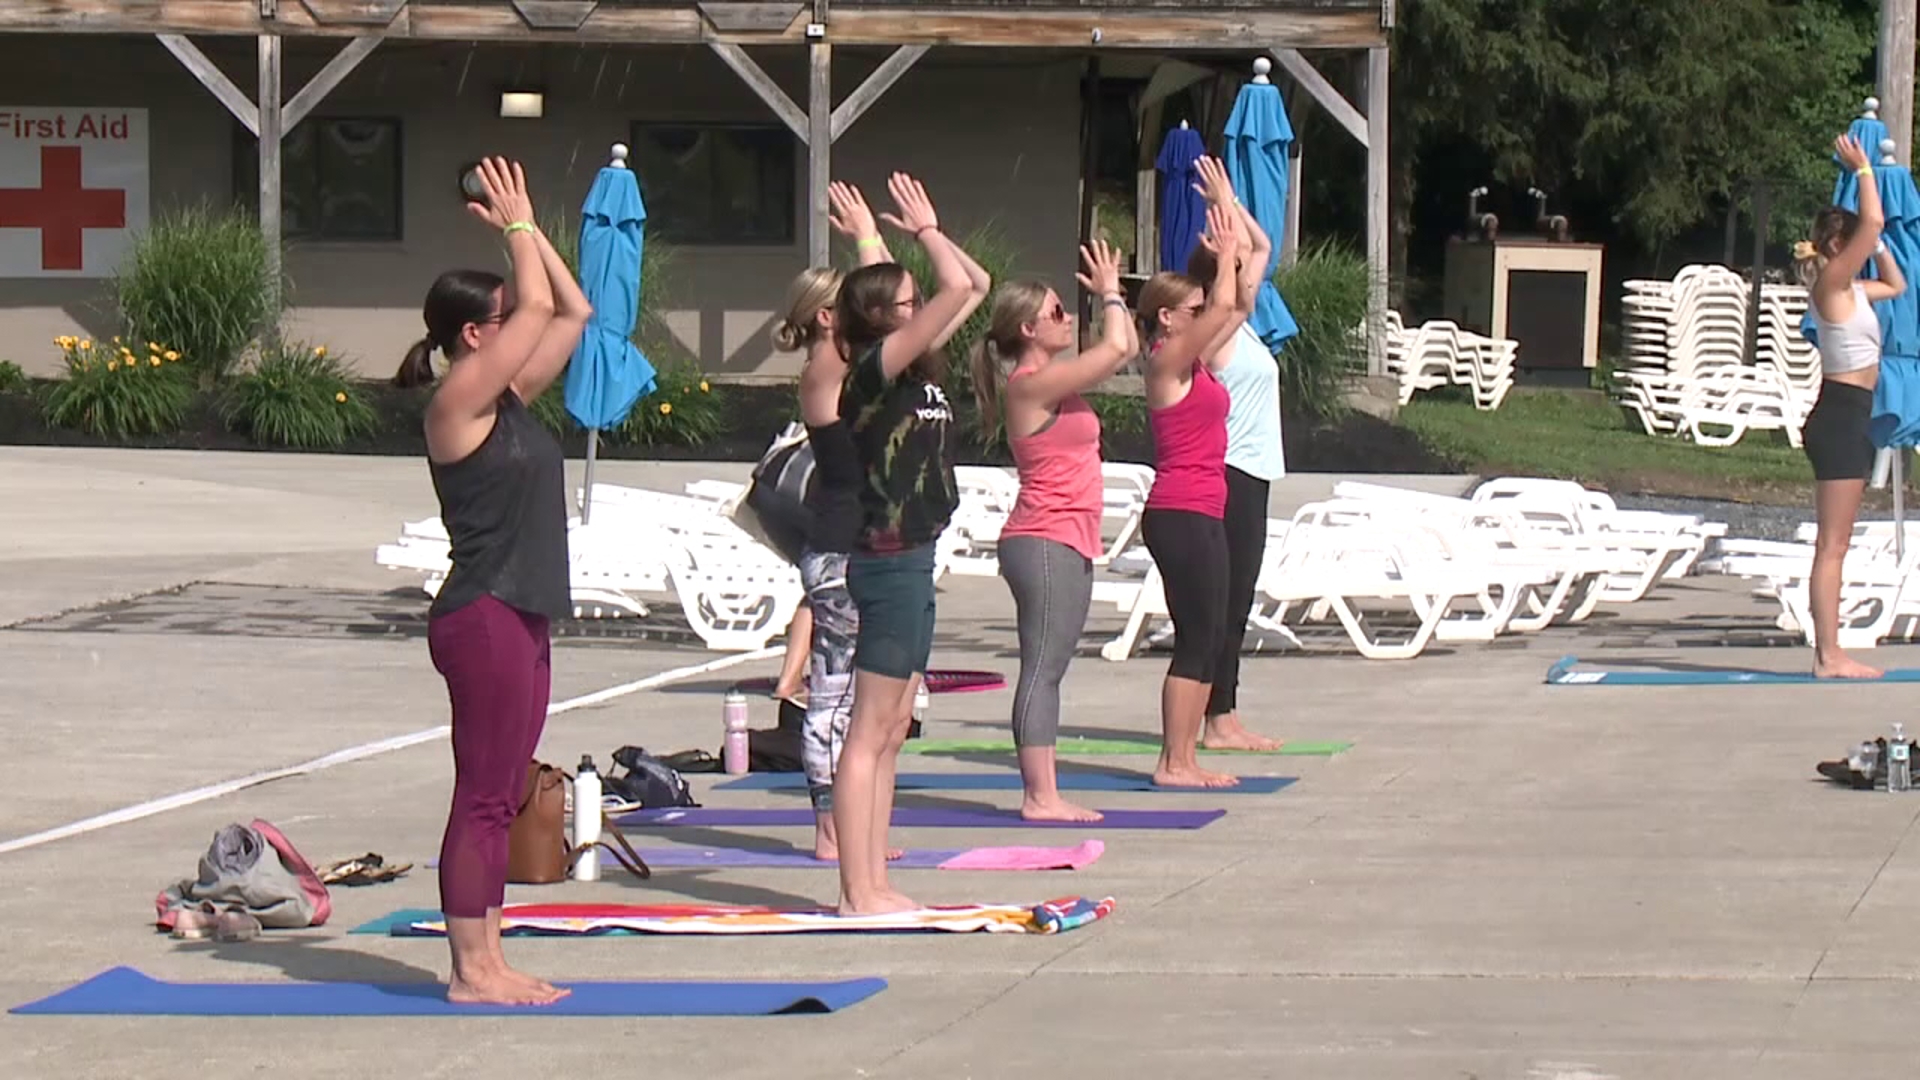 In less than a month, a festival will return for yoga enthusiasts at Montage Mountain in Moosic.